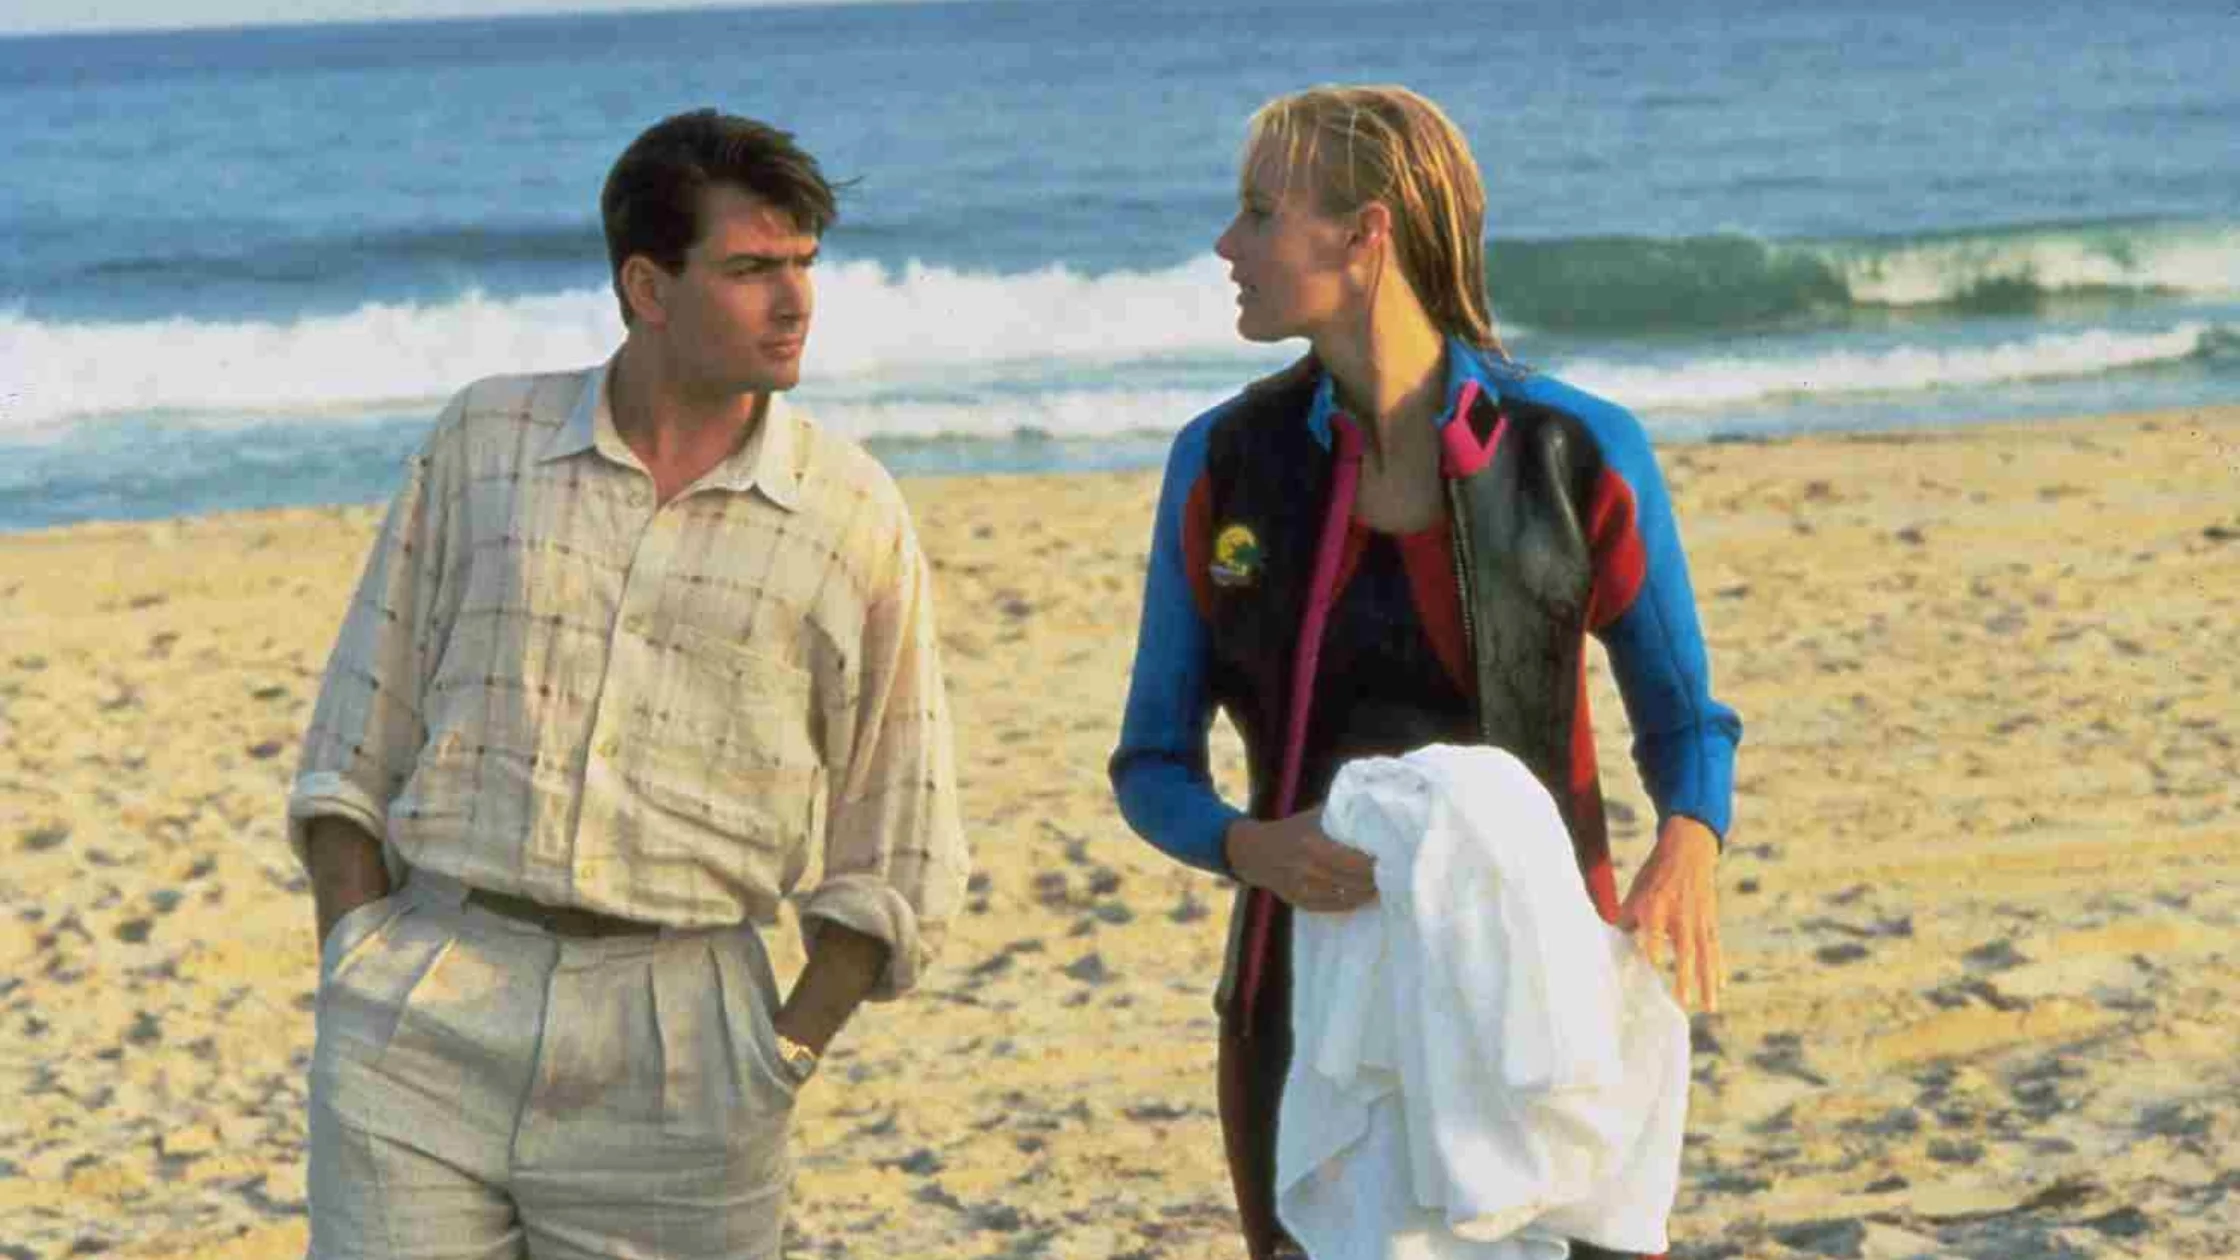 A man walking with a lady on the beach. 